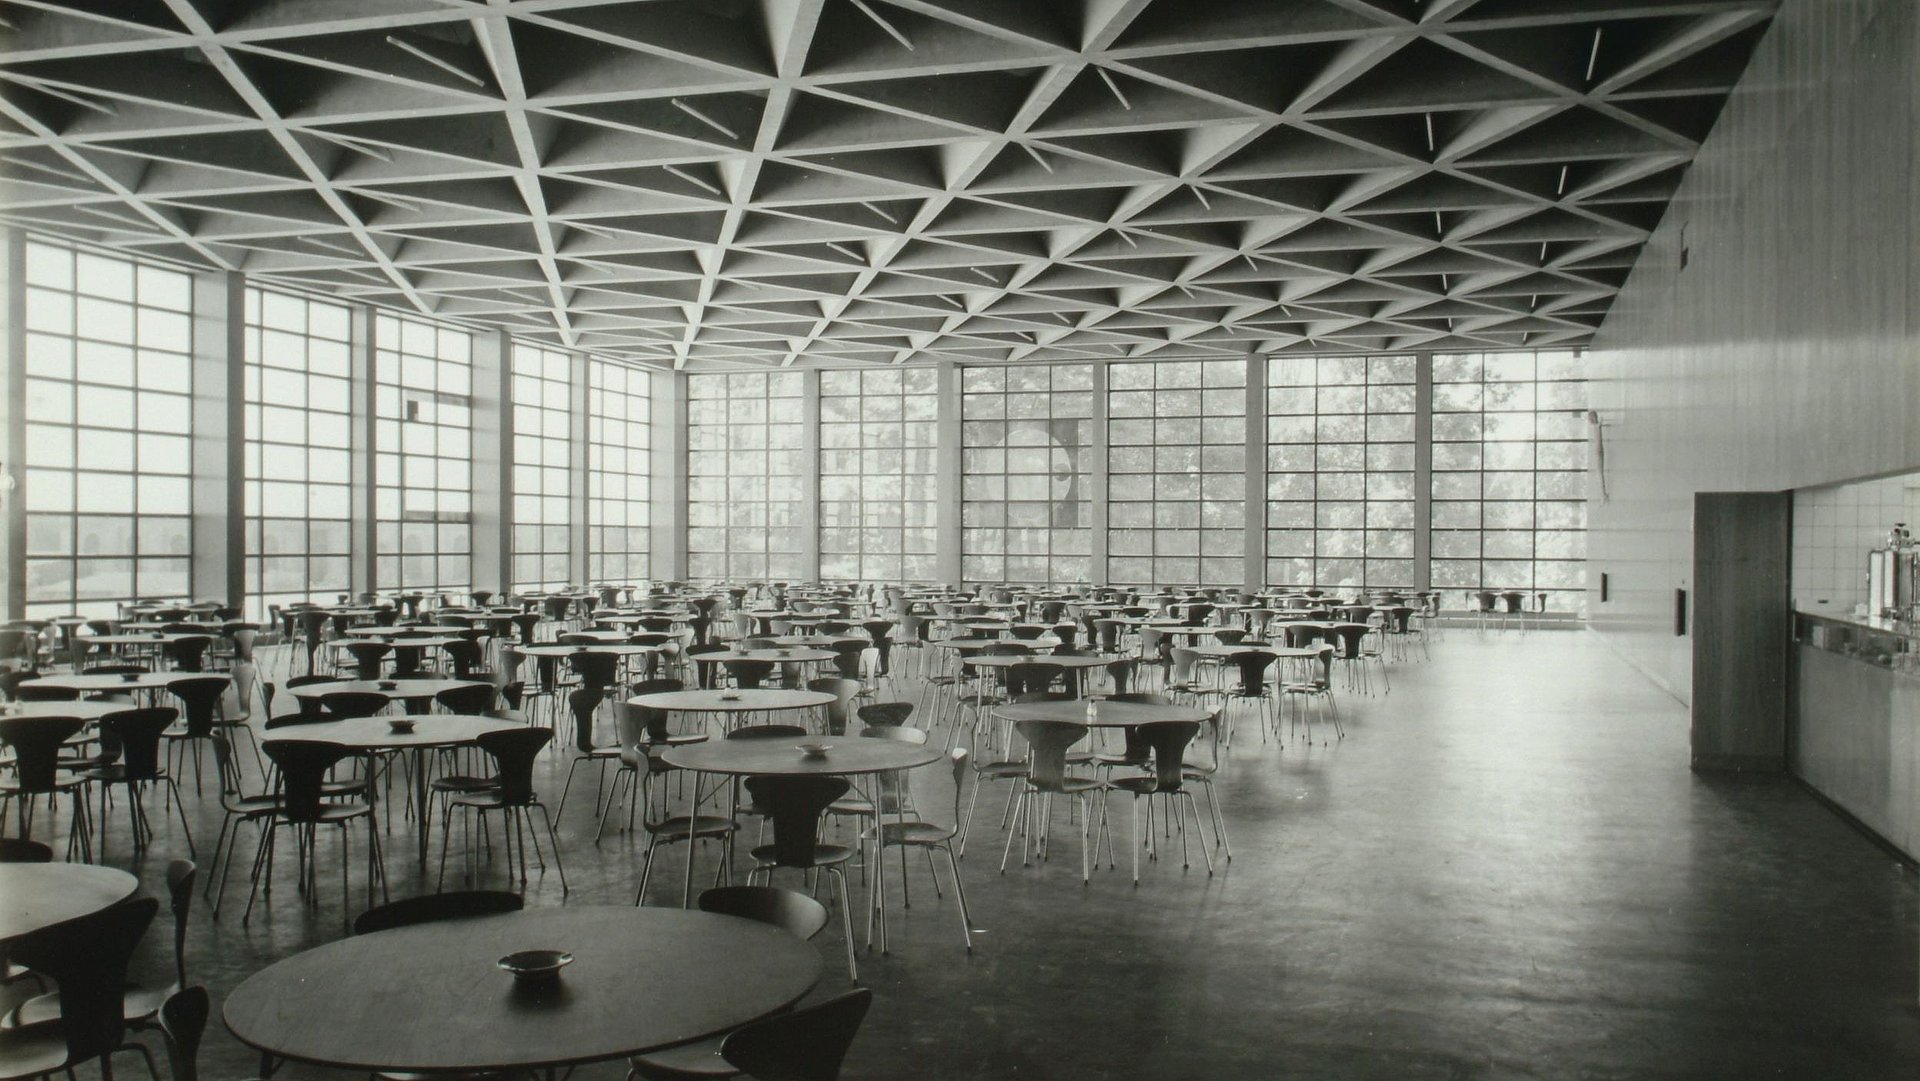 Large dining hall of the canteen, ca. 1959